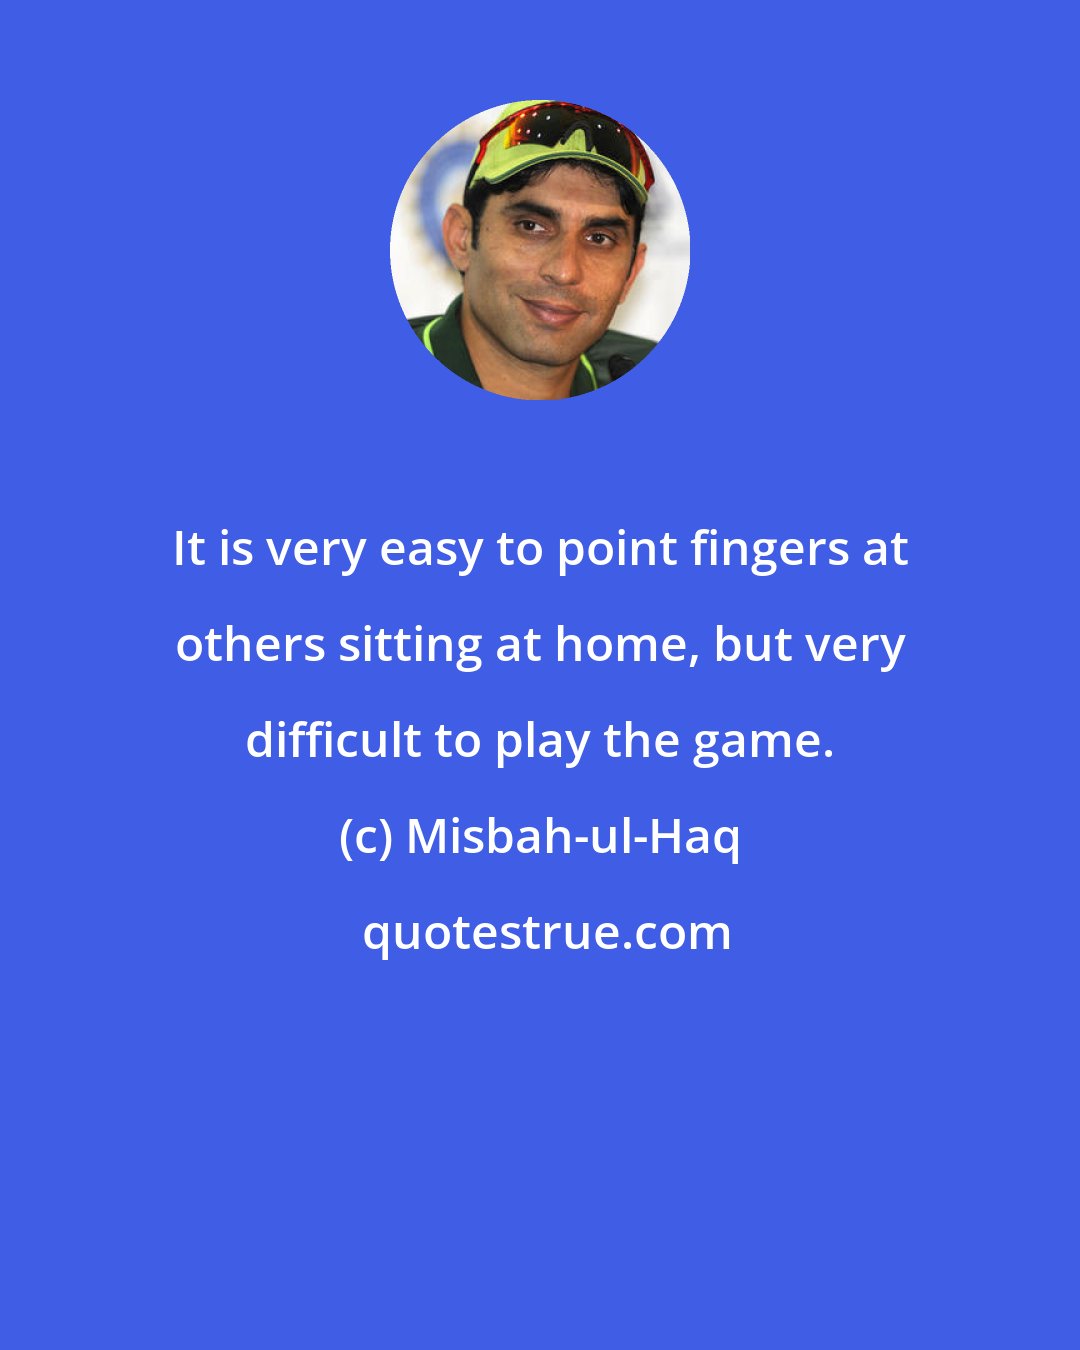 Misbah-ul-Haq: It is very easy to point fingers at others sitting at home, but very difficult to play the game.